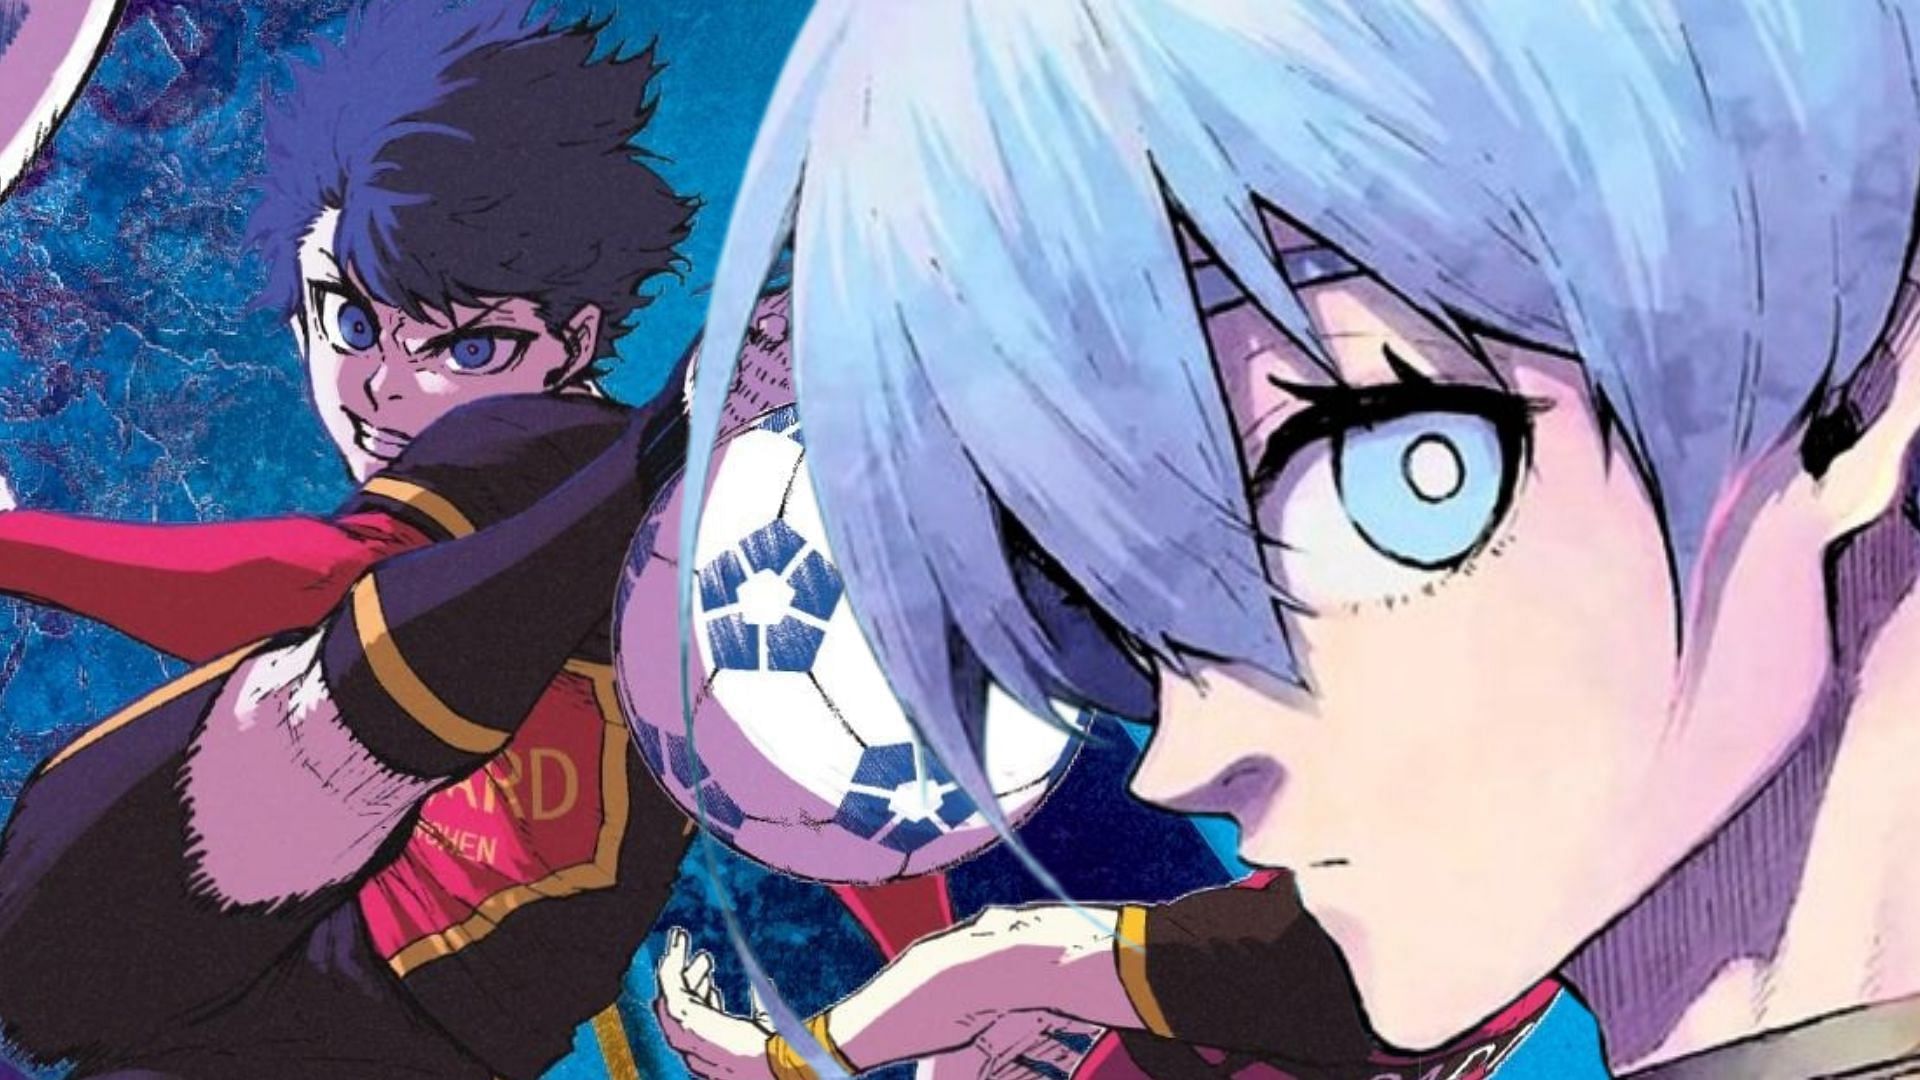 Blue Lock chapter 238: Exact release date and time, where to read, and more